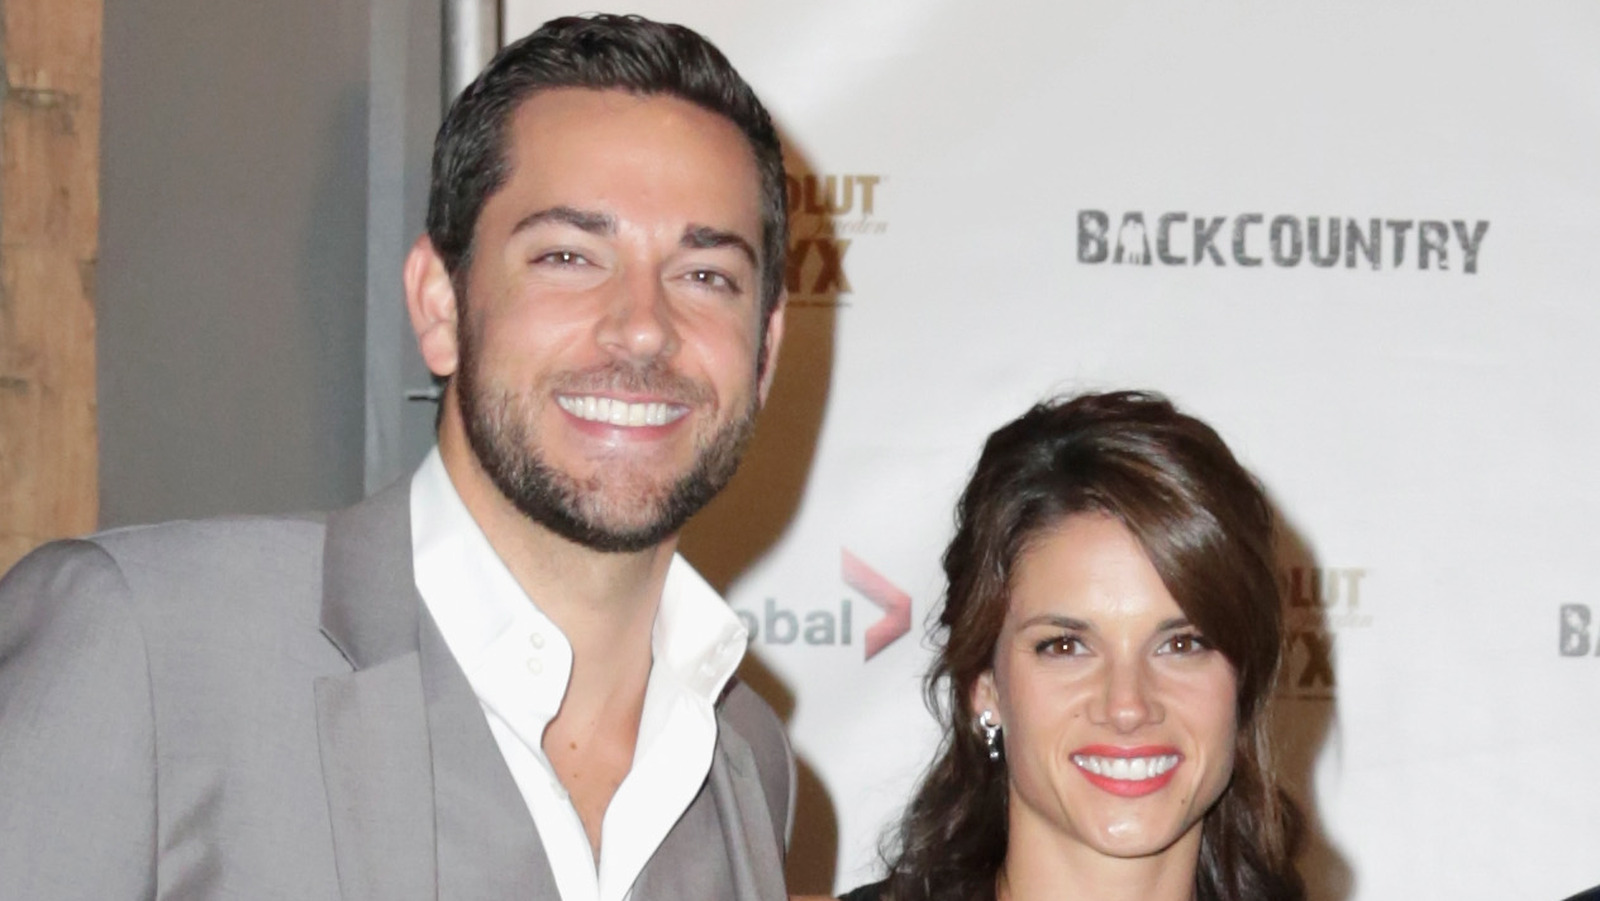 Zachary Levi S Marriage To Missy Peregrym Didn T Even Last A Year